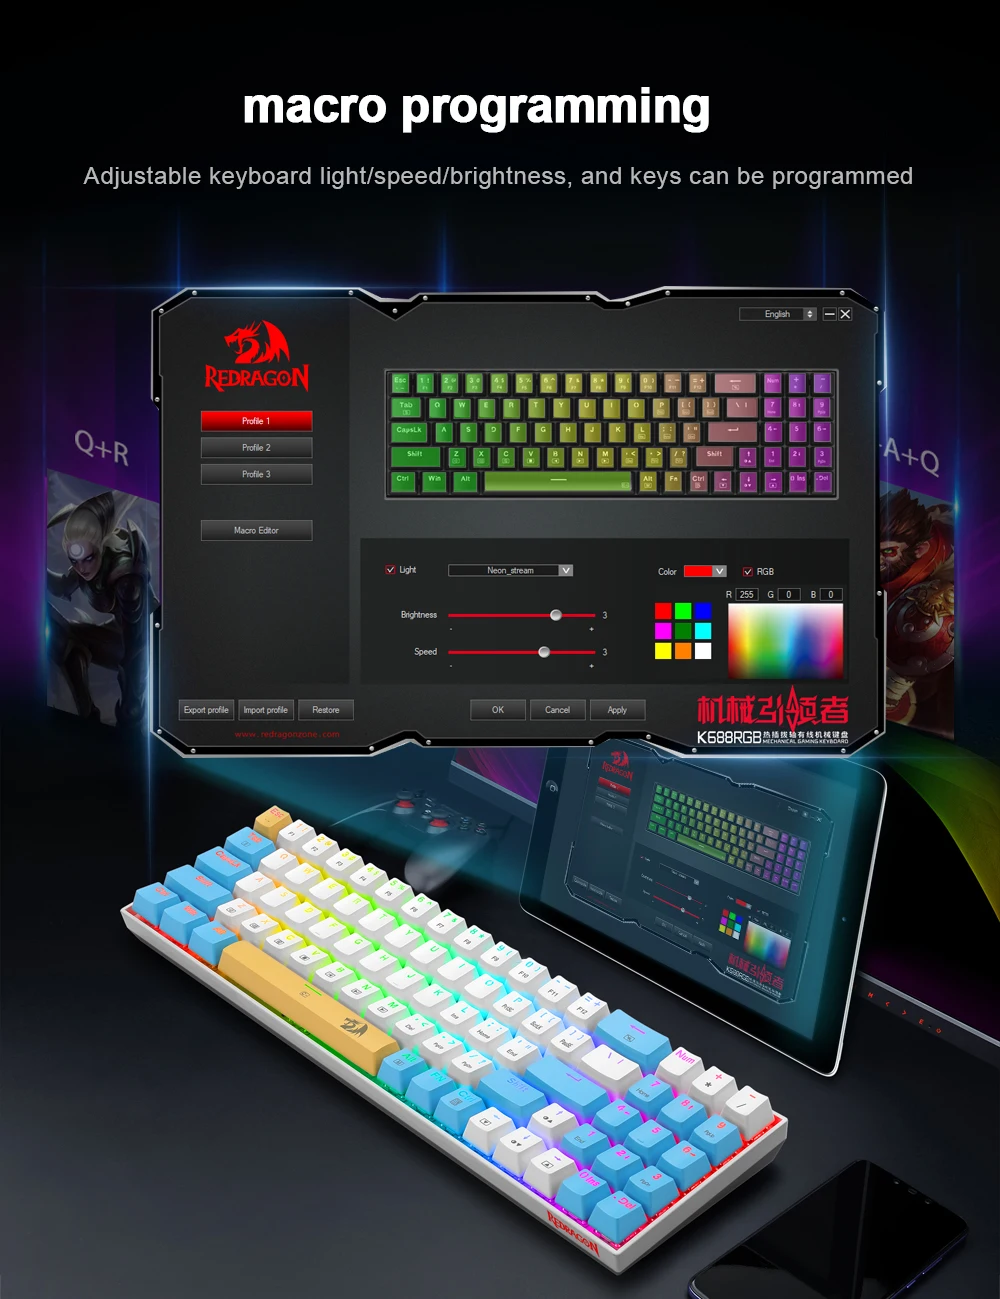 “unleash your gaming potential with k688 rgb mini mechanical keyboard – 78 keys, blue/red switch, detachable usb cable for pc and laptop gaming